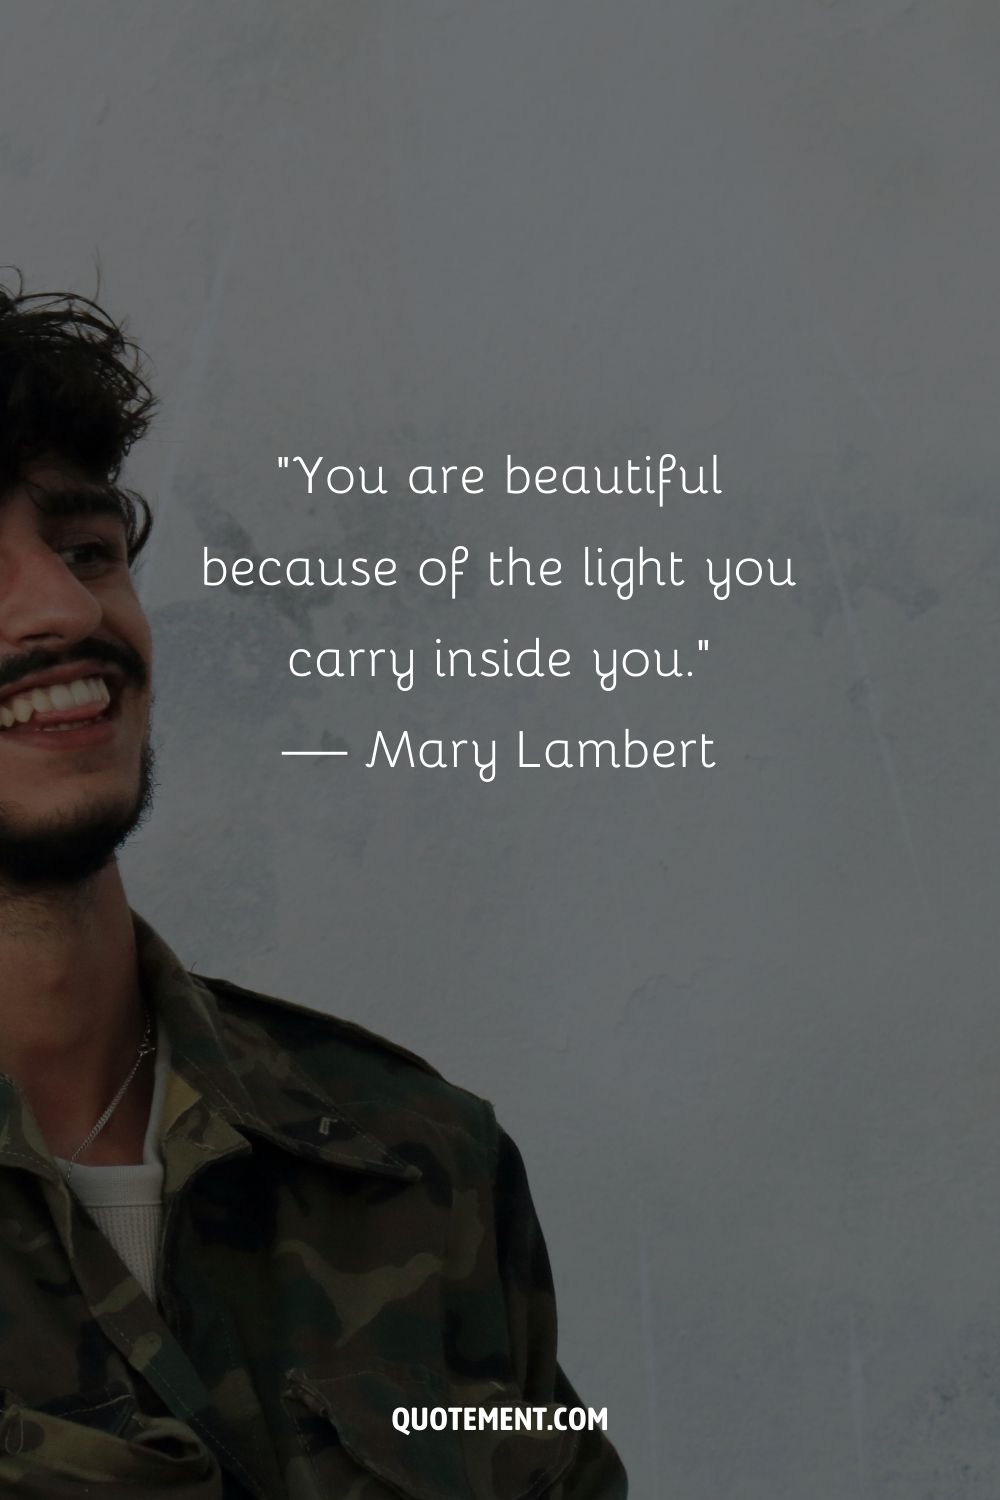 “You are beautiful because of the light you carry inside you.” — Mary Lambert